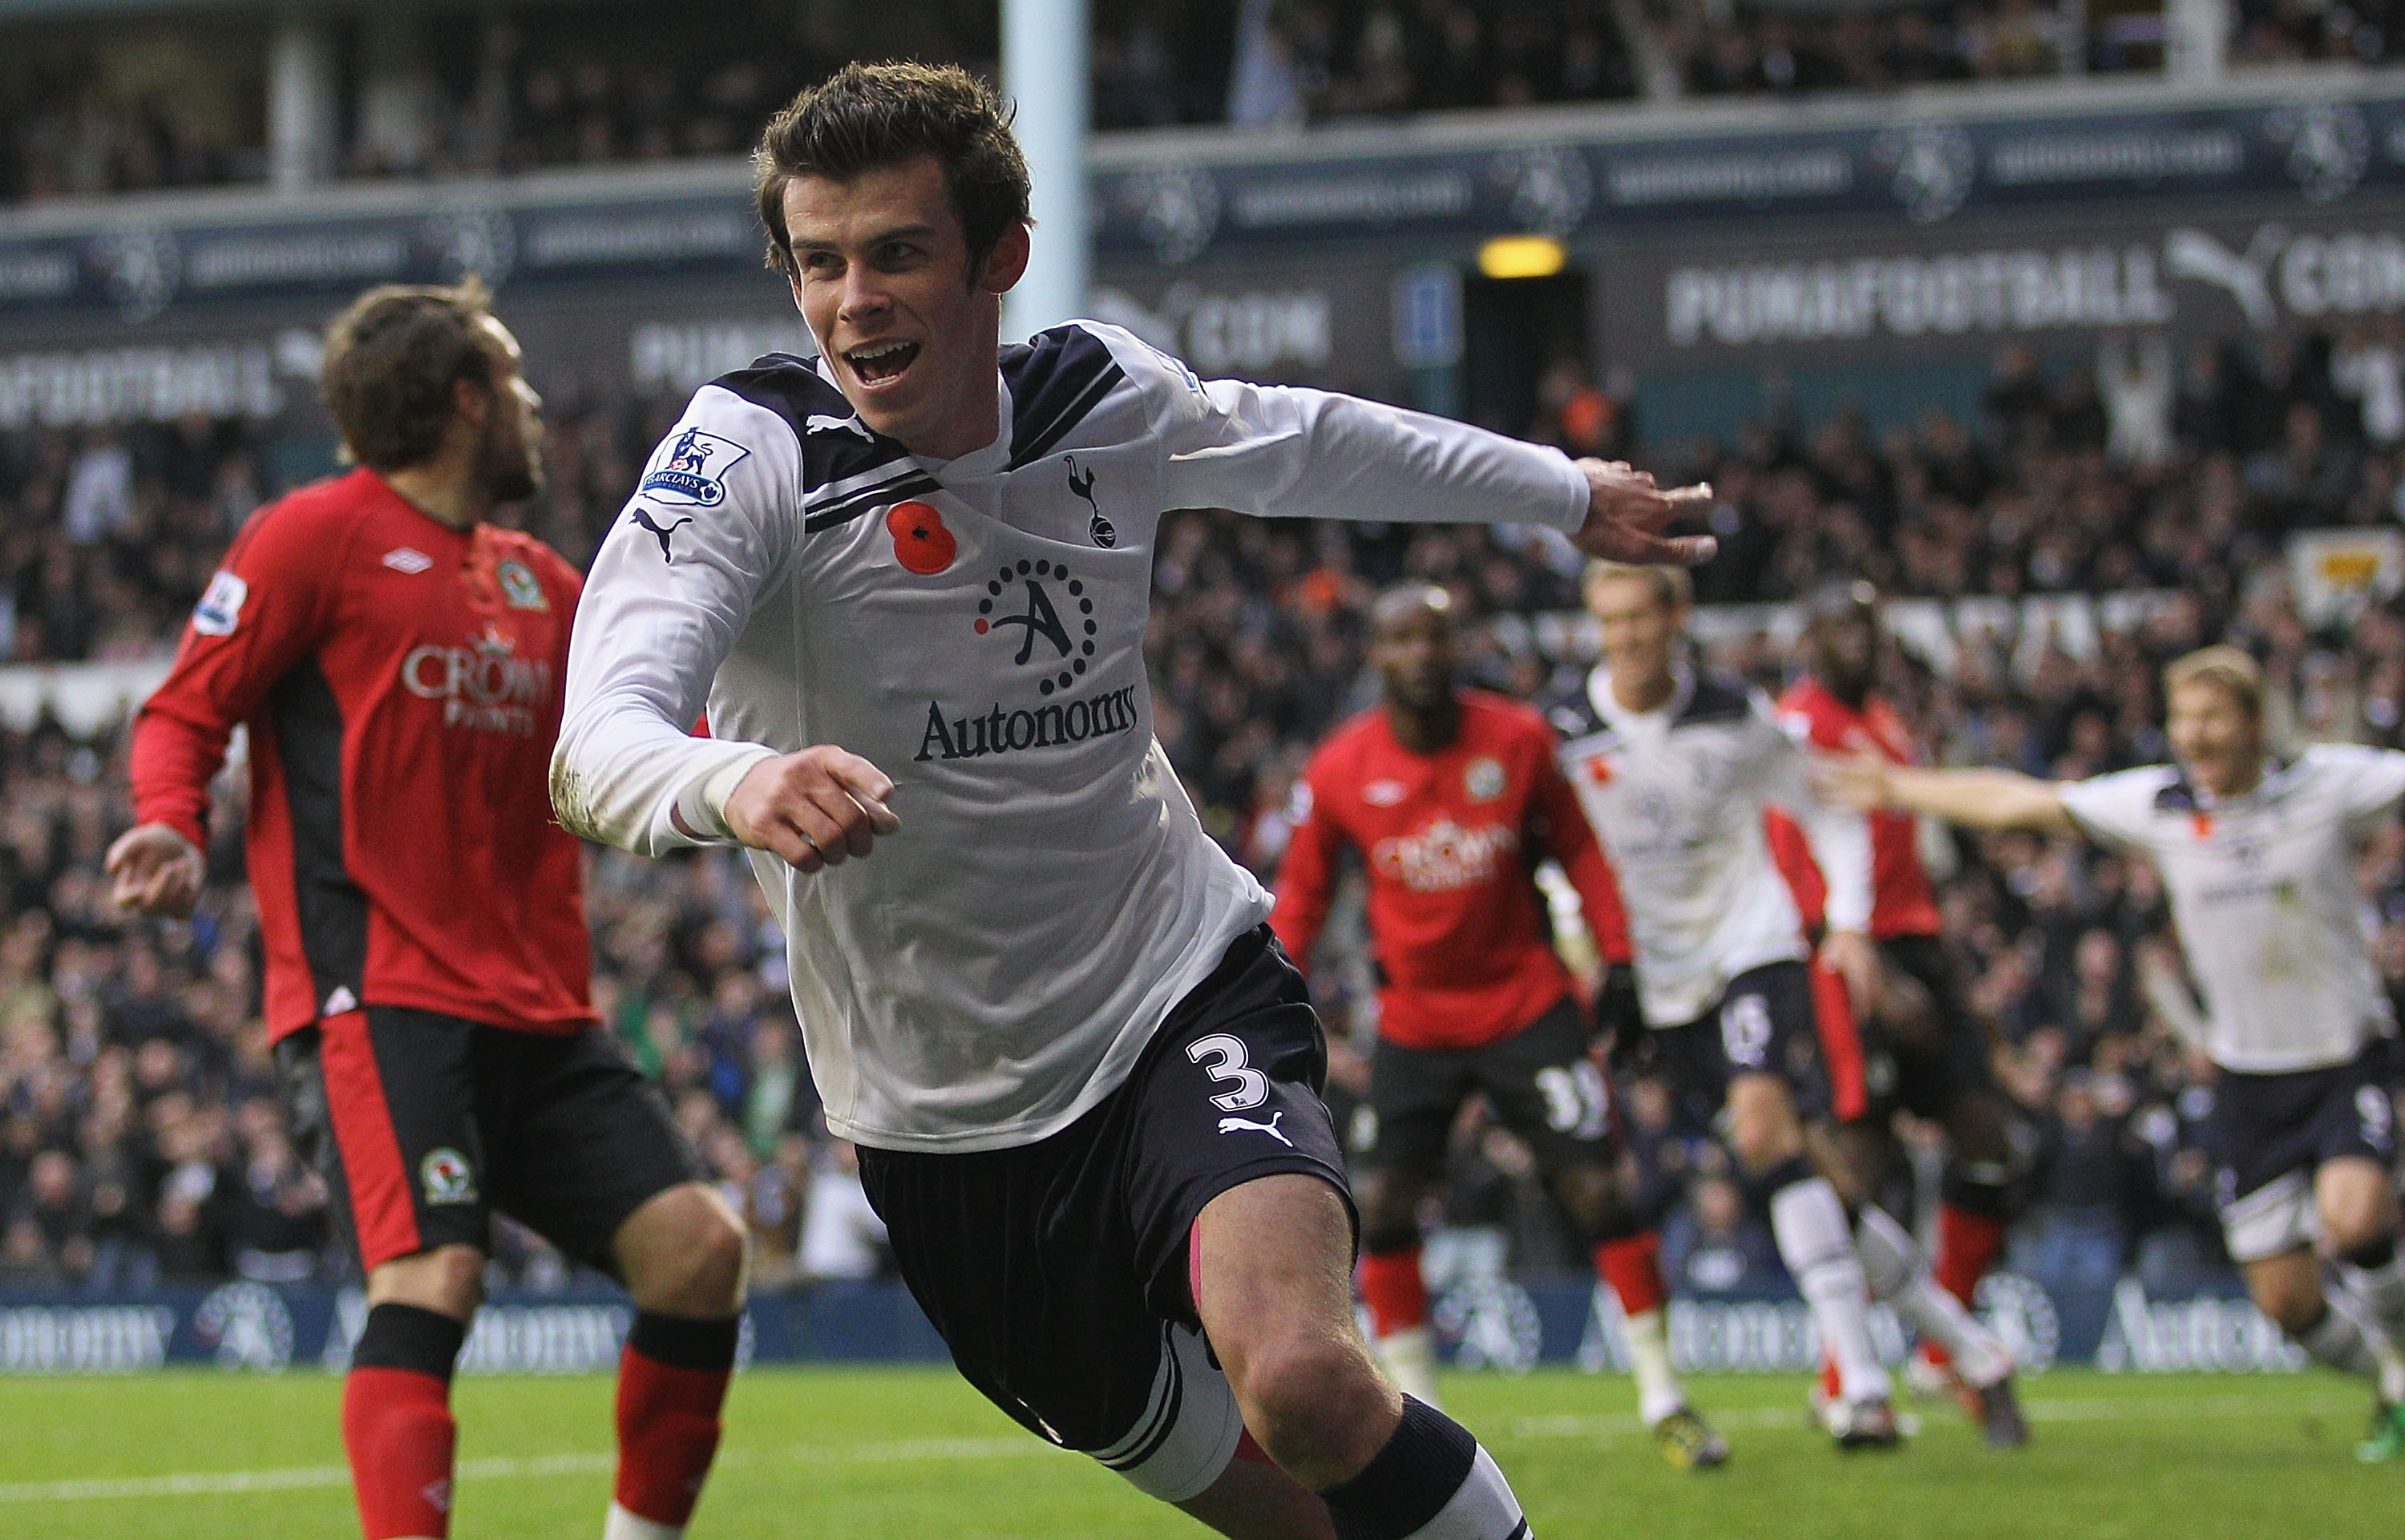 LONDON, ENGLAND - NOVEMBER 13:  Gareth Bale of Tottenham celebrates scoring their first goal during the Barclays Premier League match between Tottenham Hotspur and Blackburn Rovers at White Hart Lane on November 13, 2010 in London, England.  (Photo by Ham